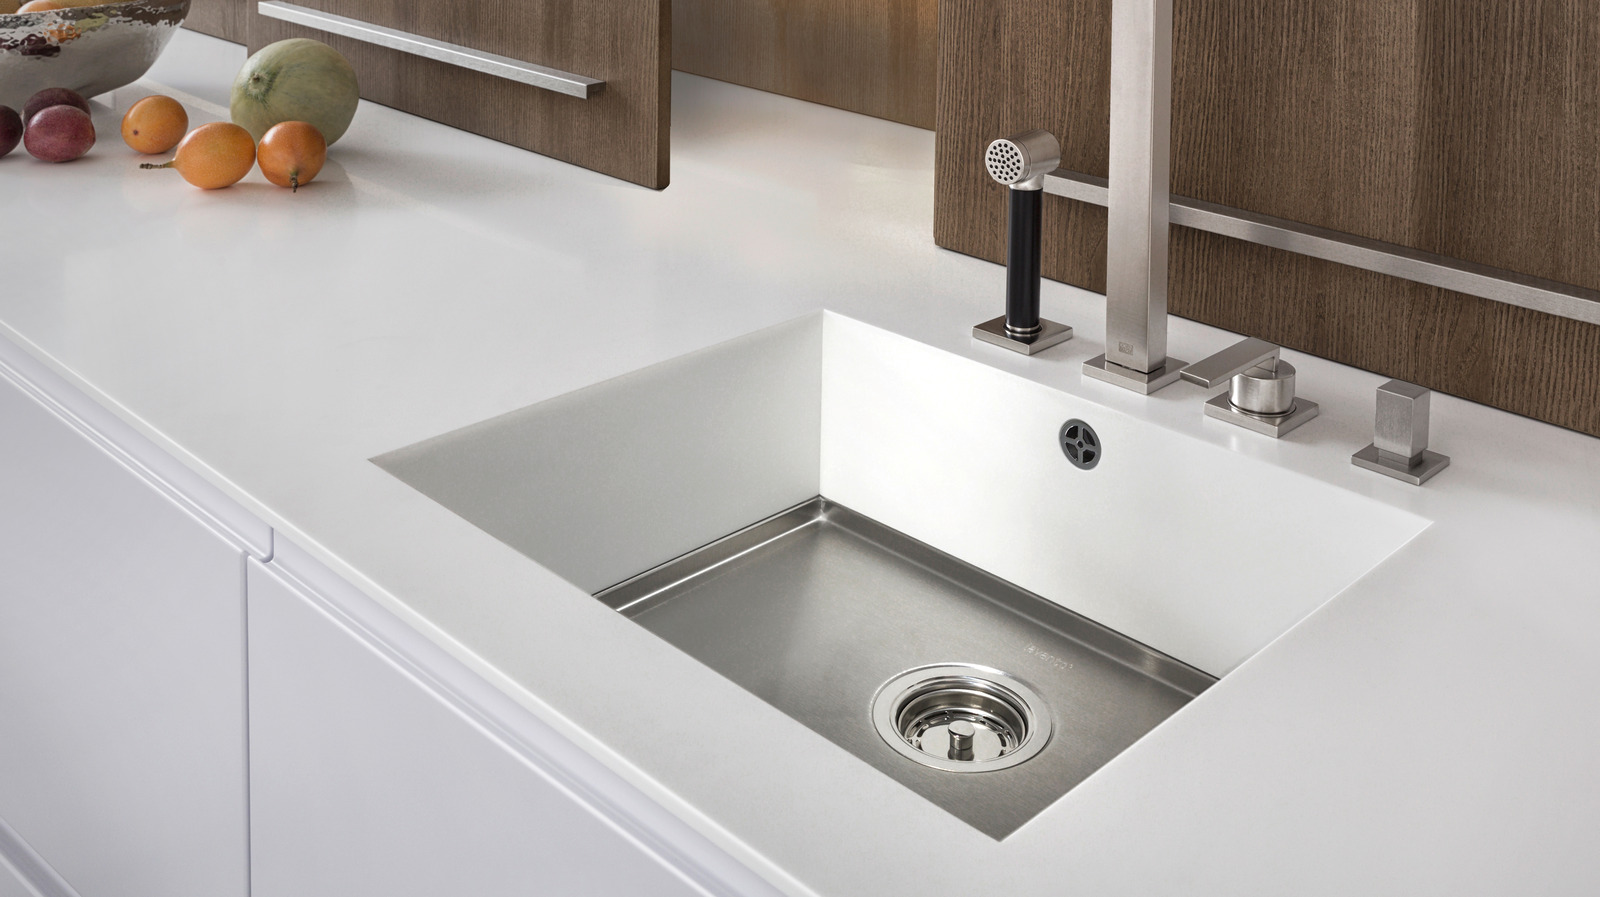 An Expert Explains How To Clean Your Kitchen Sink So It’s Free Of Germs